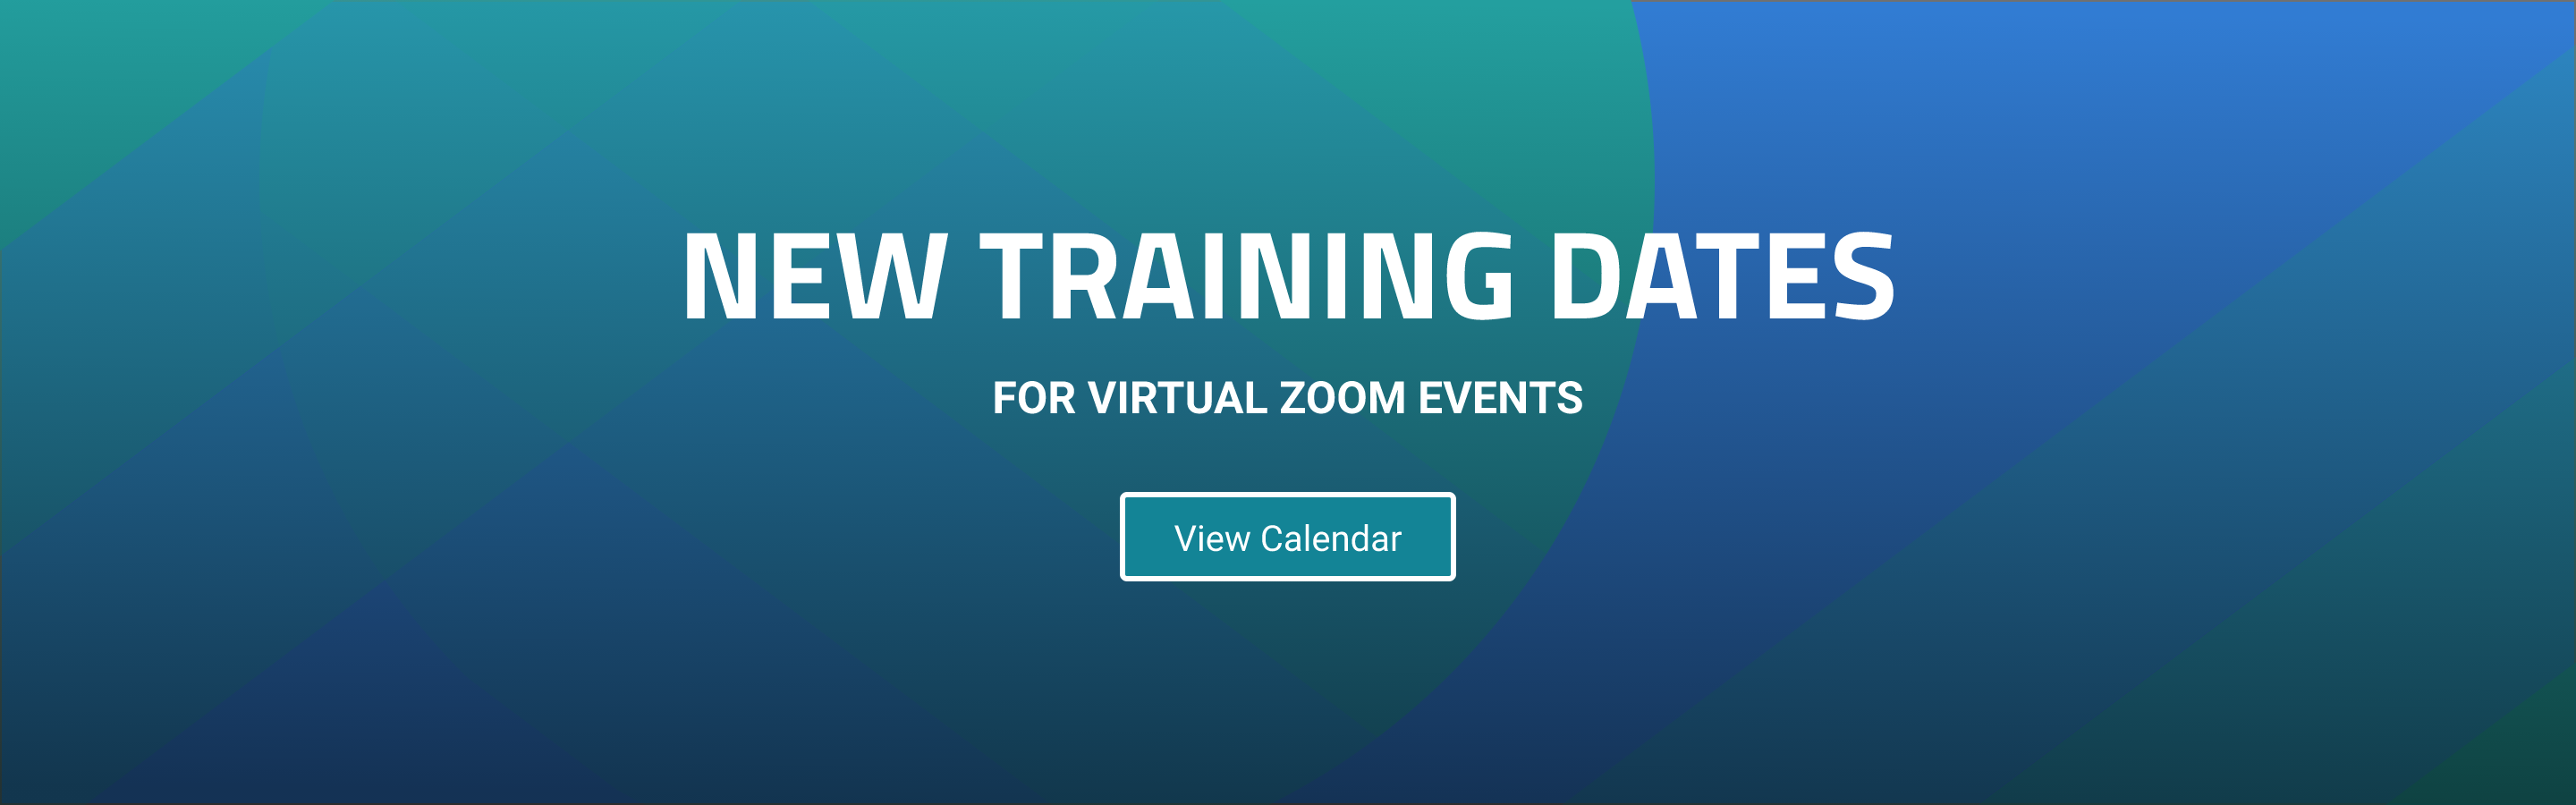 New Training dates for January Virtual Zoom Event